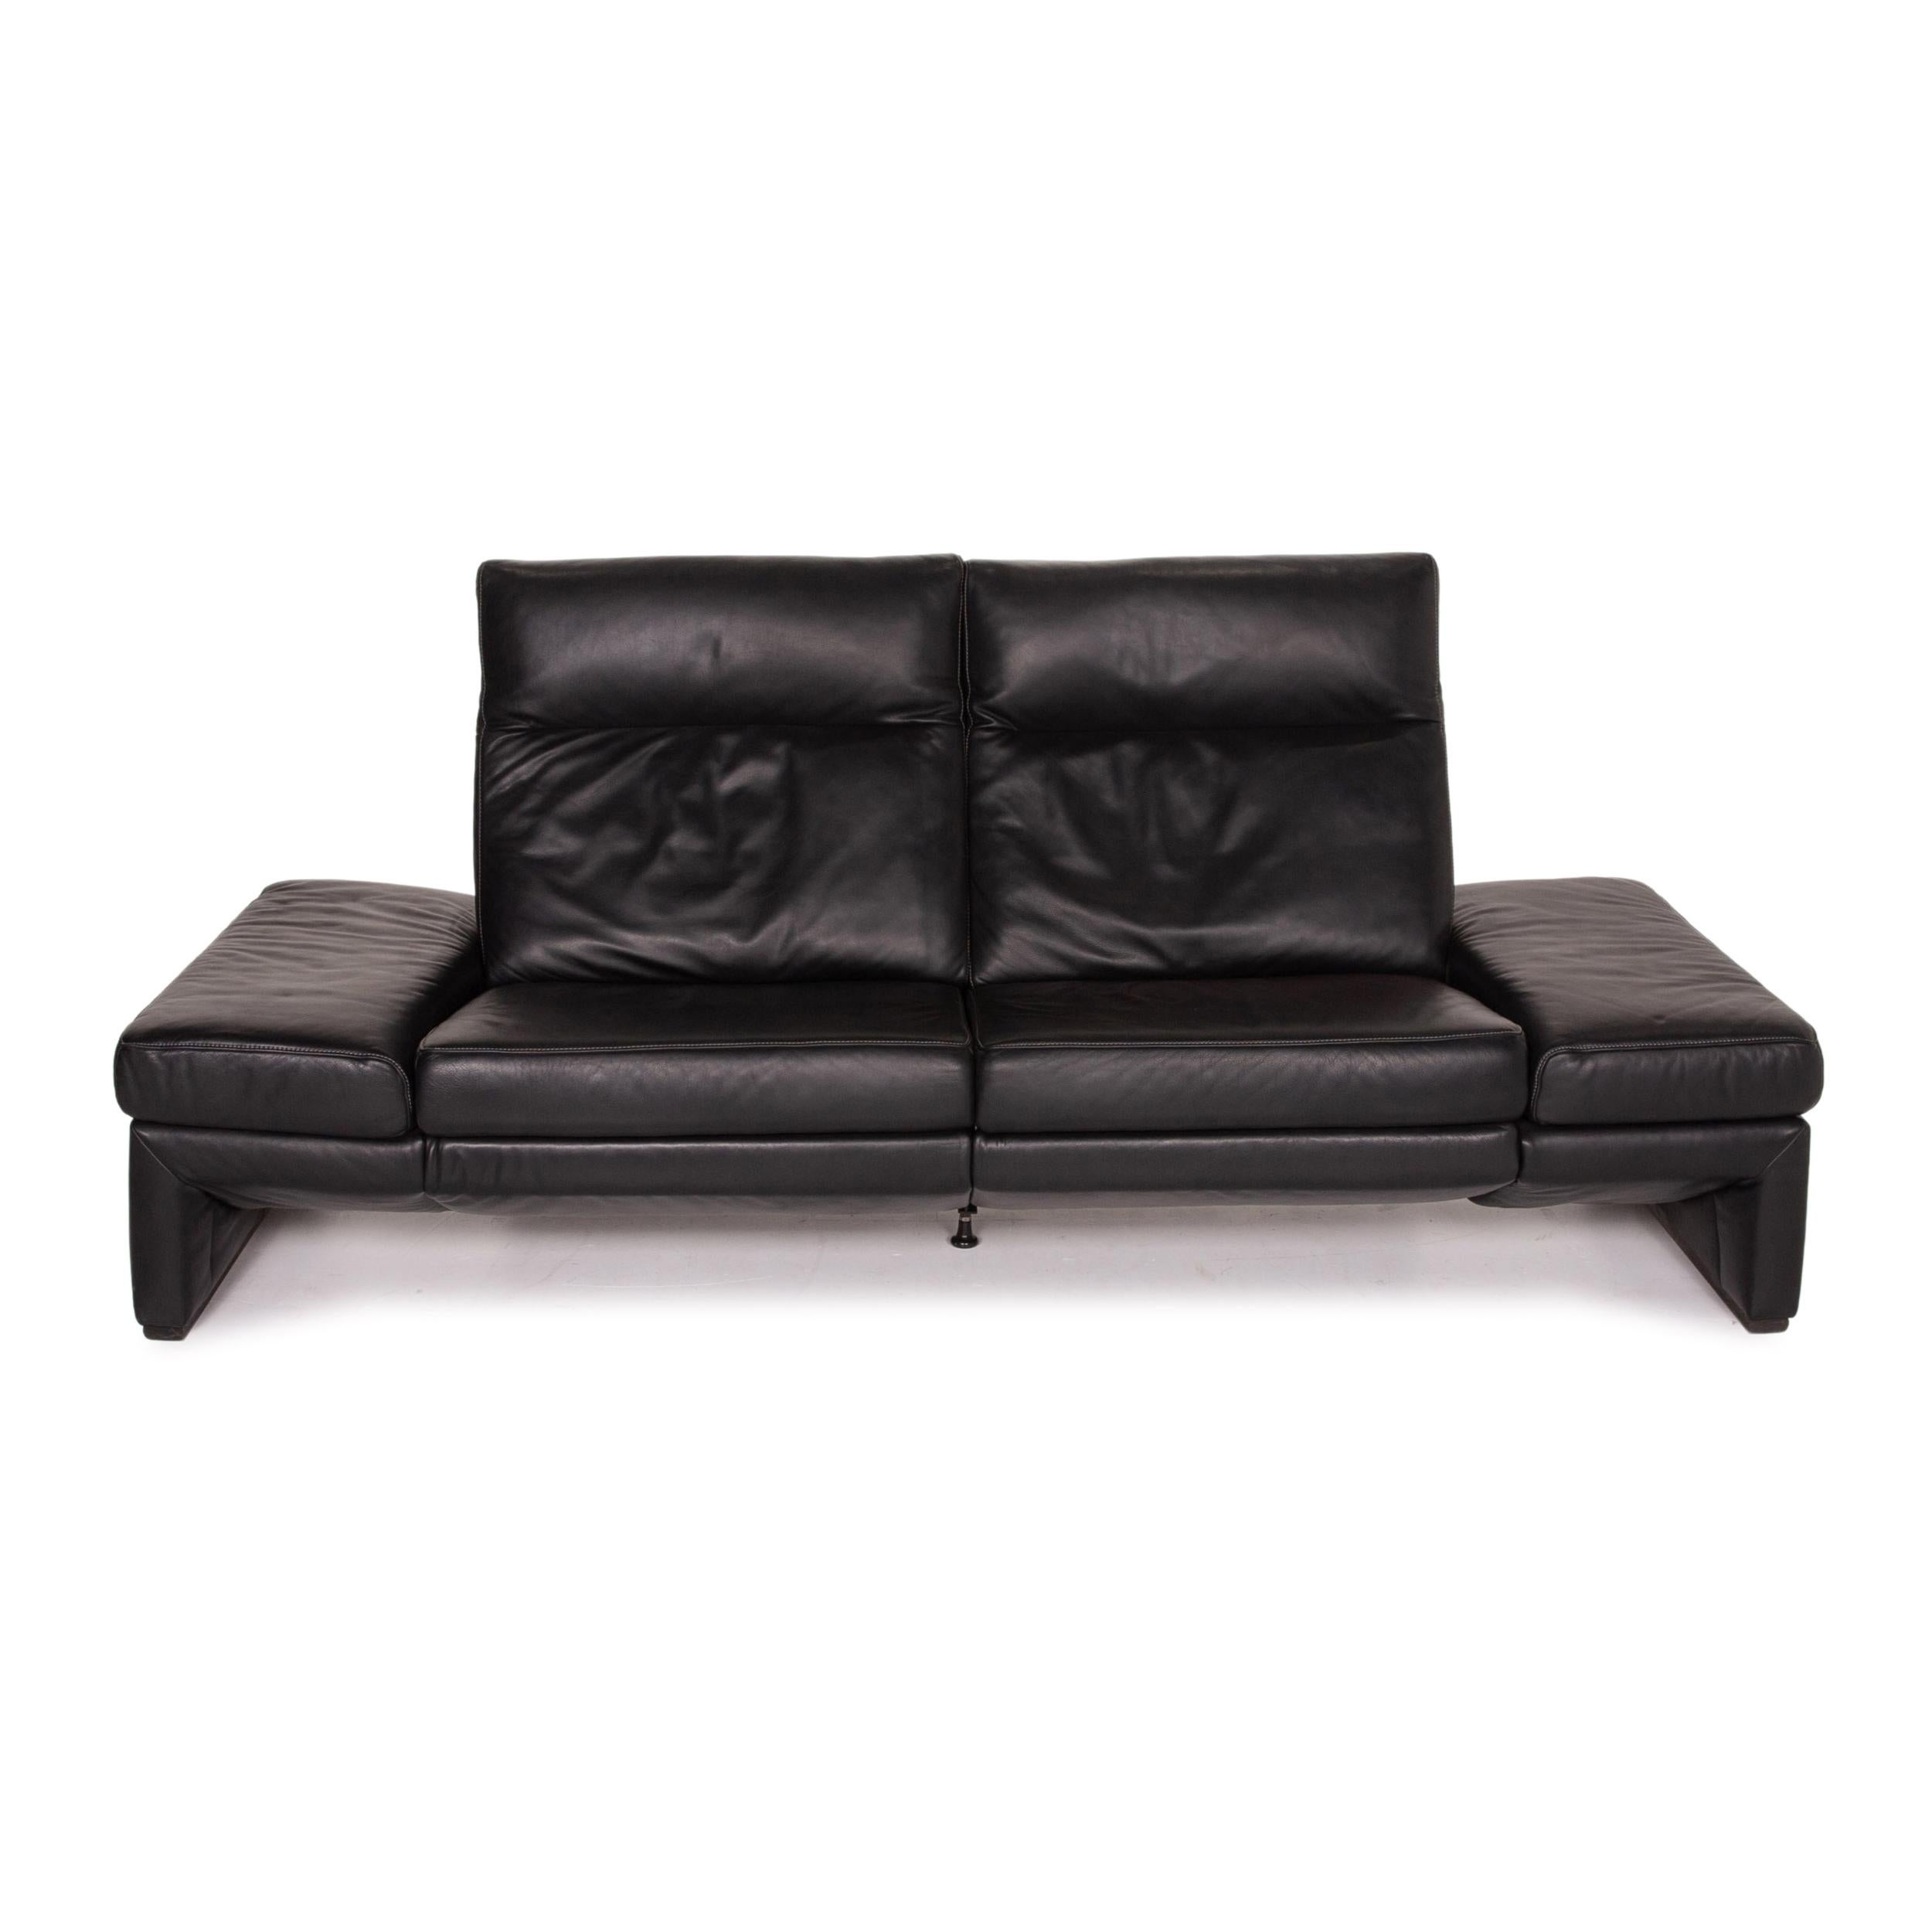 Mondo Leather Sofa Black Three-Seat Electrical Function Relaxation Function 4